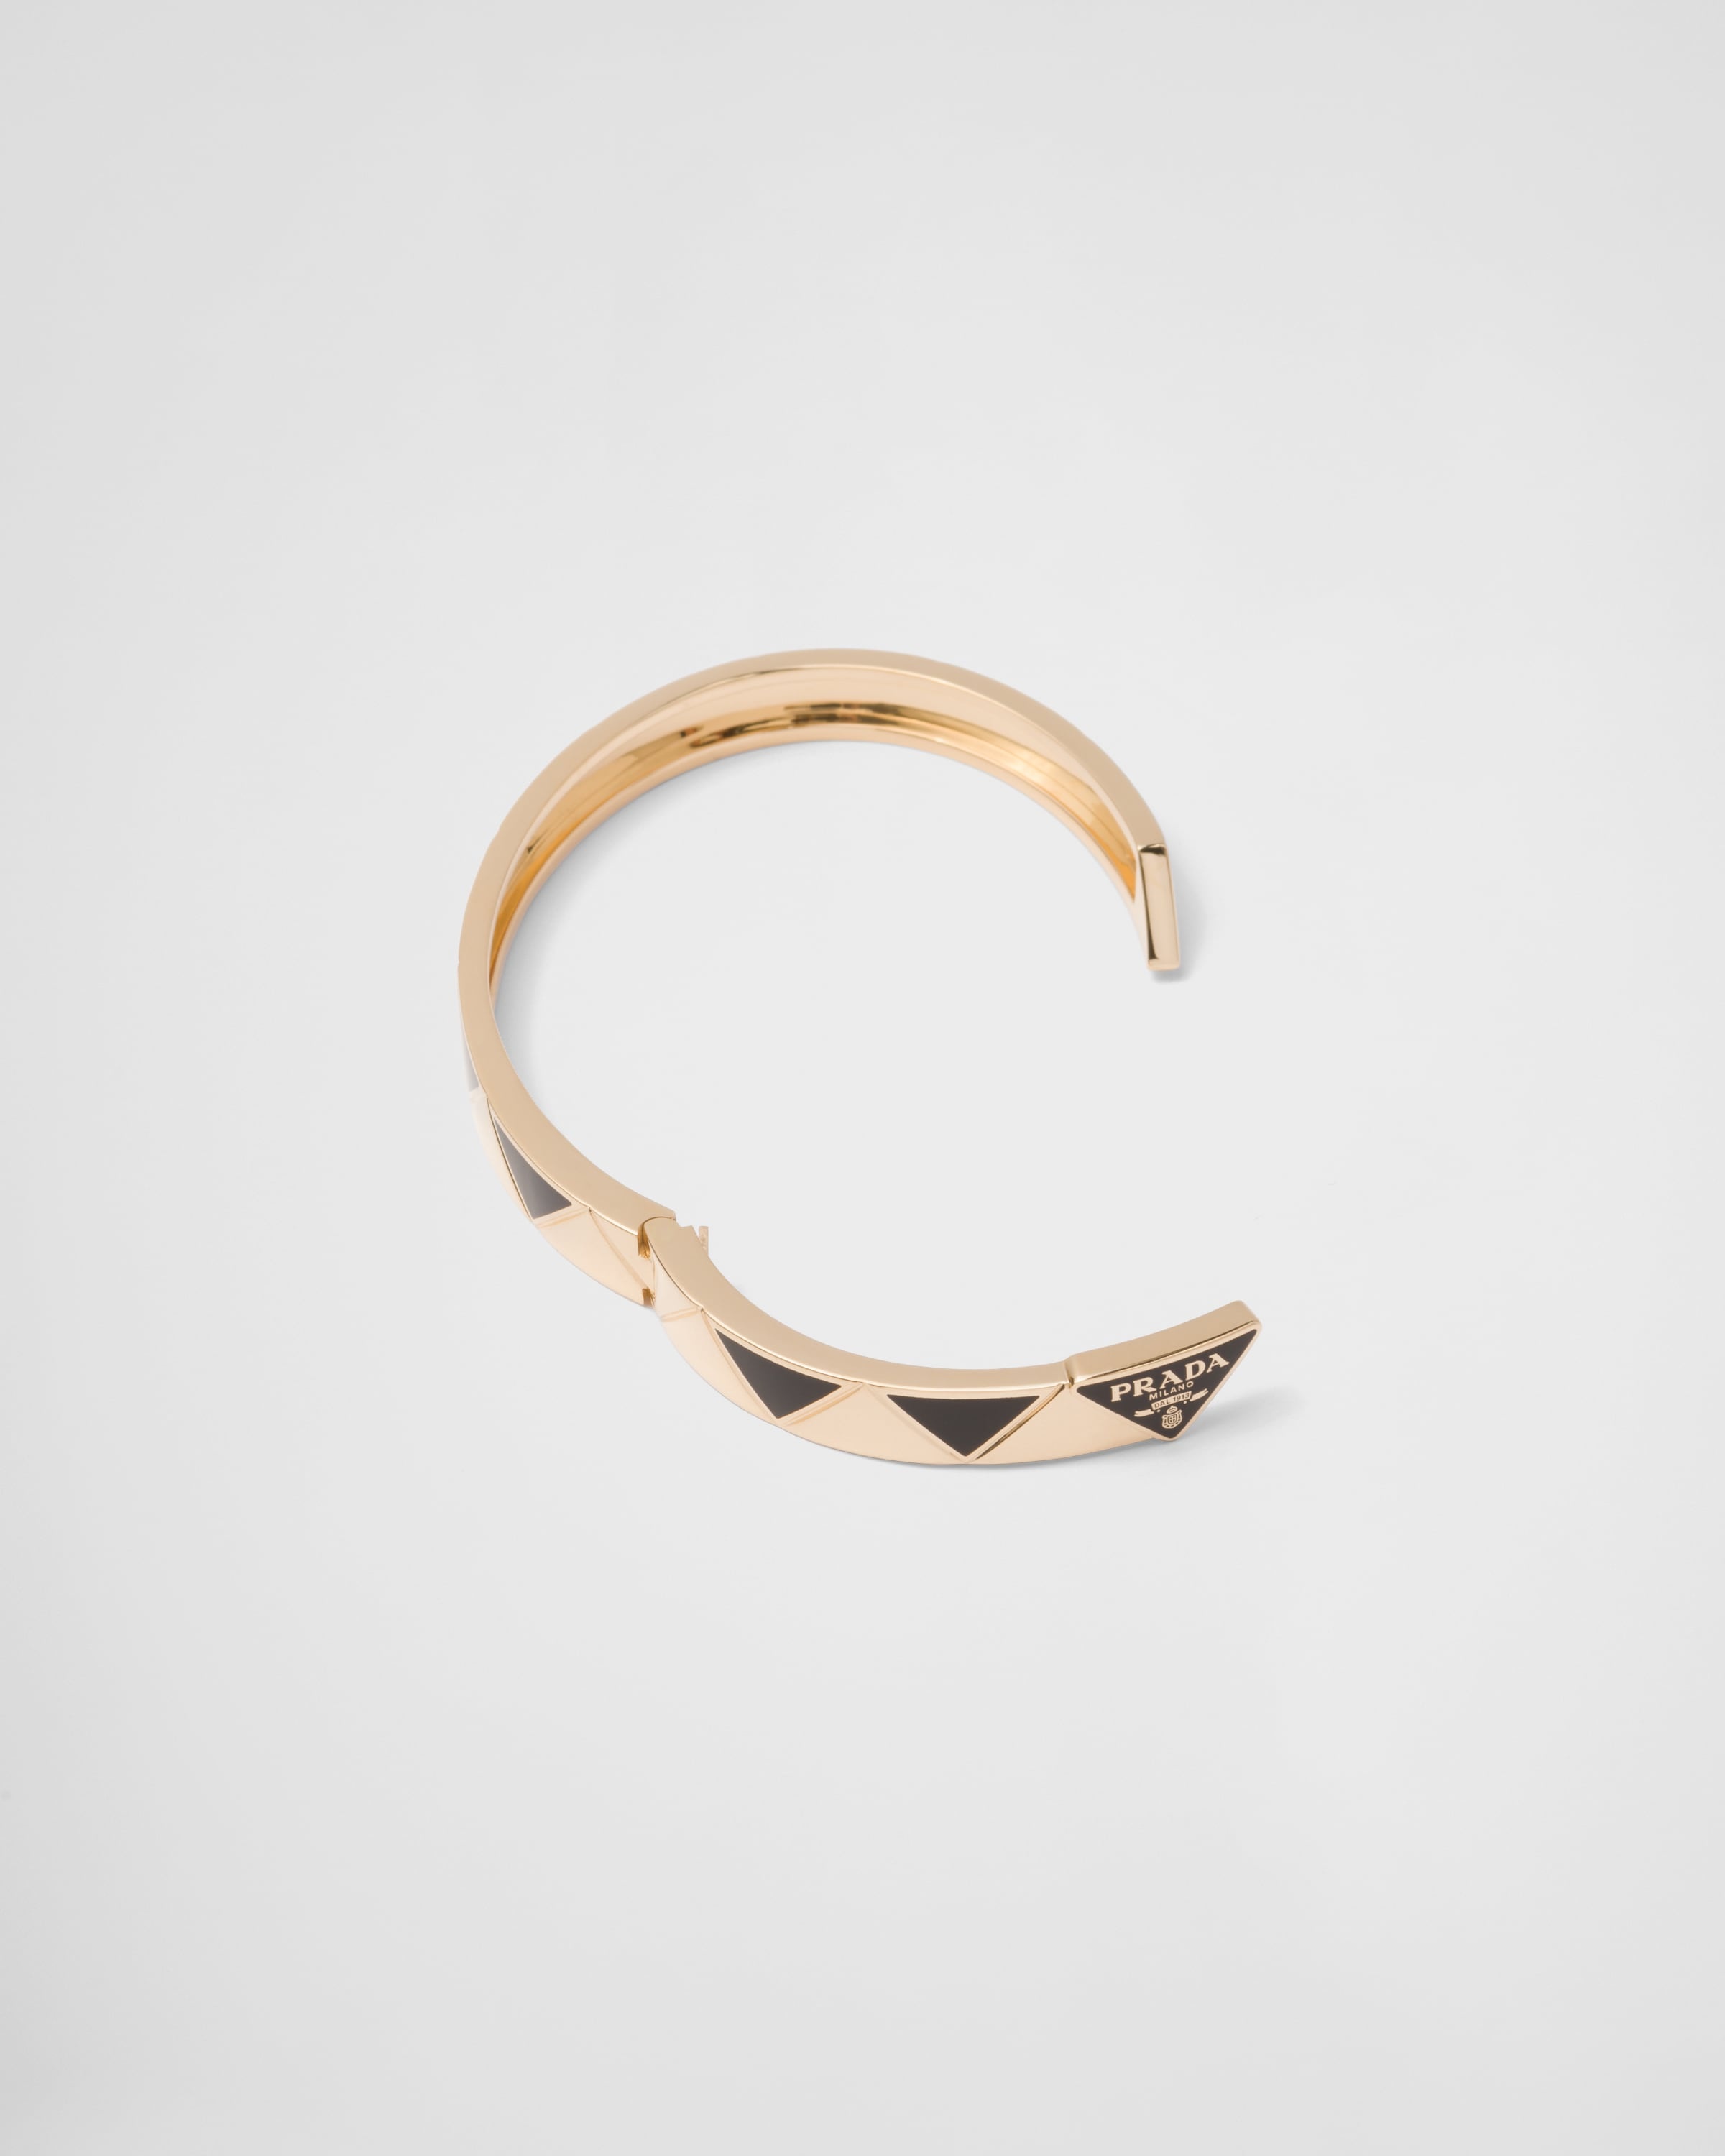 Eternal Gold bangle bracelet in yellow gold with ceramic elements - 4